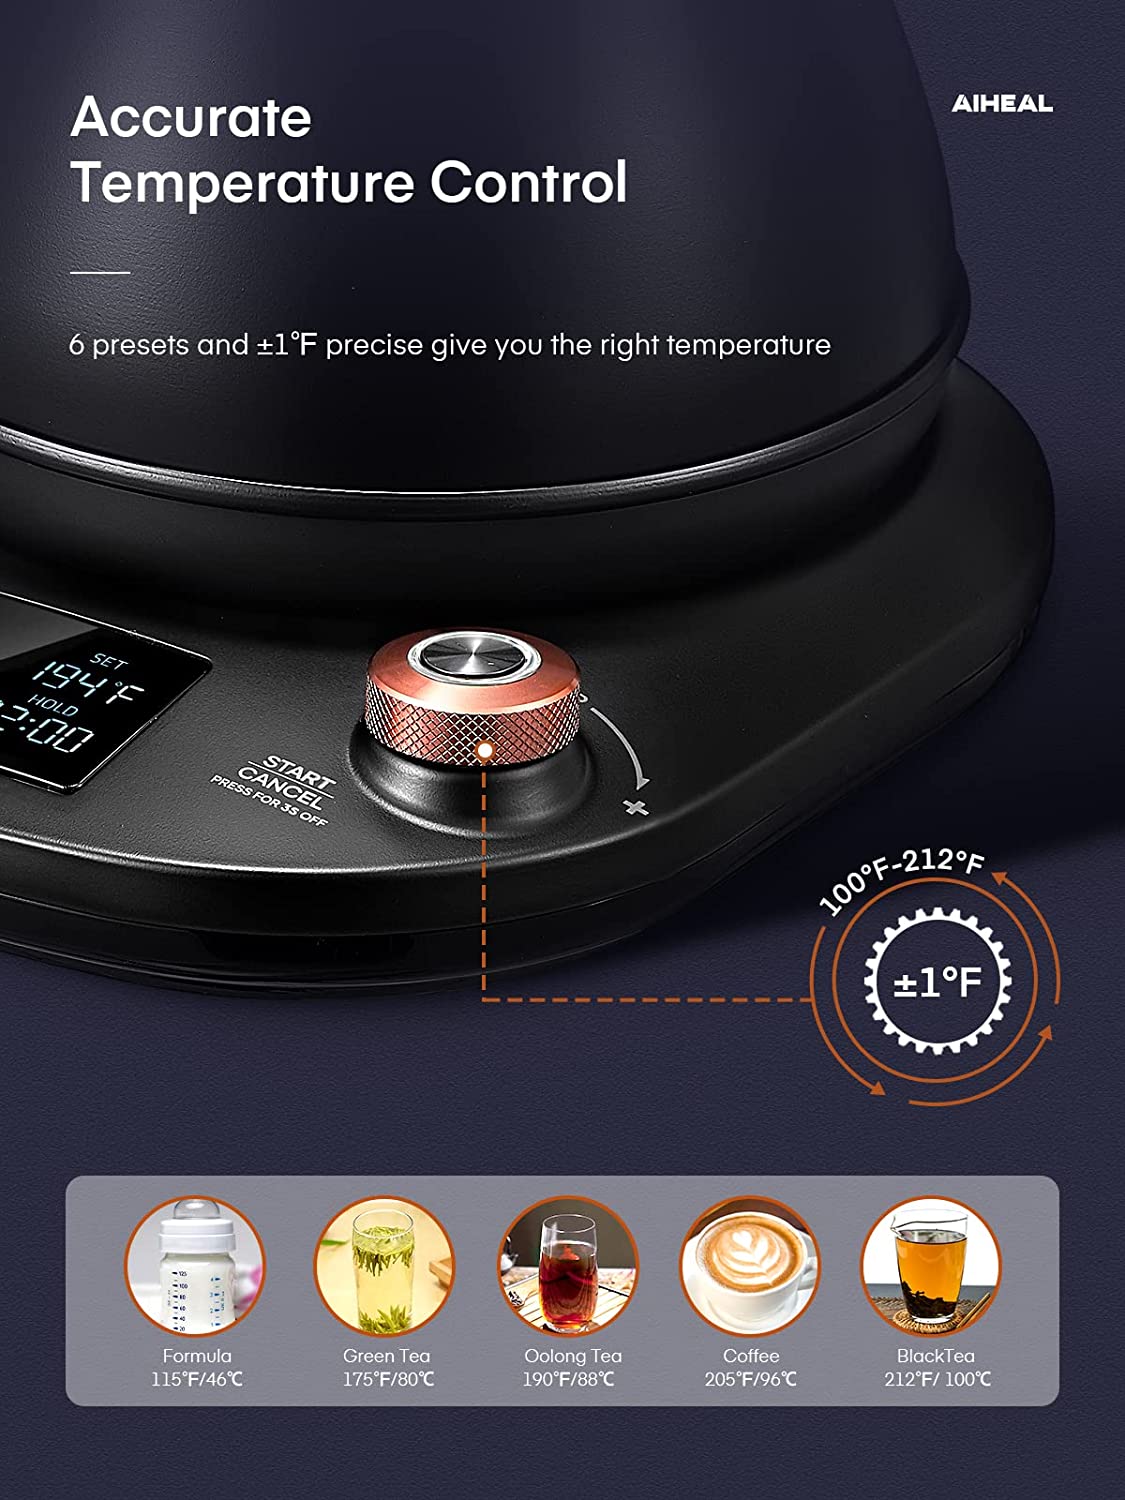 aiheal tea kettle, accurate temperature control, Great for Daily Tea Drinkers who Value Convenience and Precision